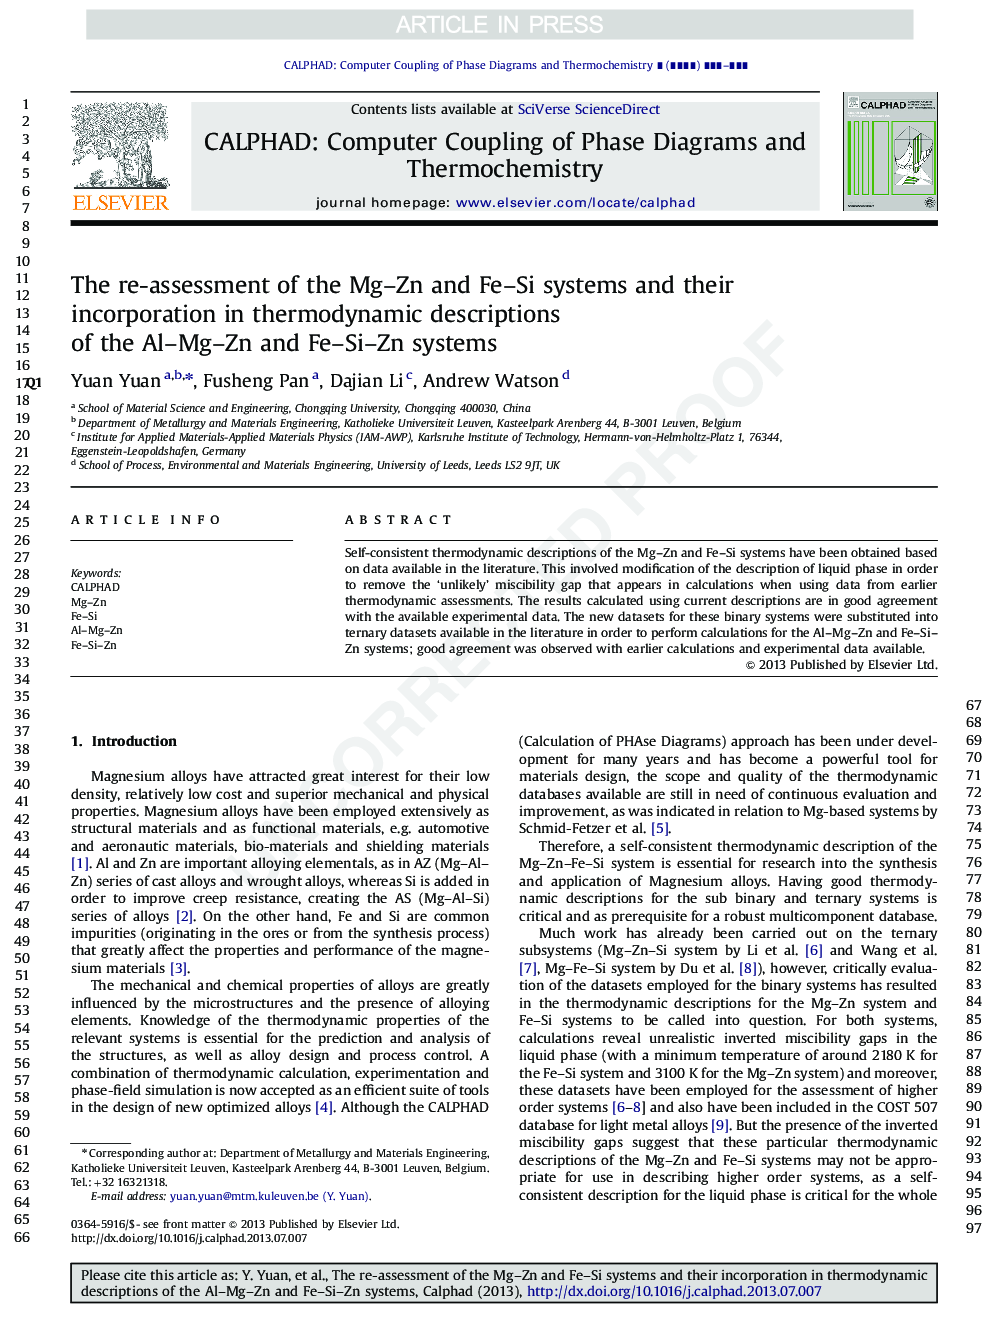 The re-assessment of the Mg-Zn and Fe-Si systems and their incorporation in thermodynamic descriptions of the Al-Mg-Zn and Fe-Si-Zn systems